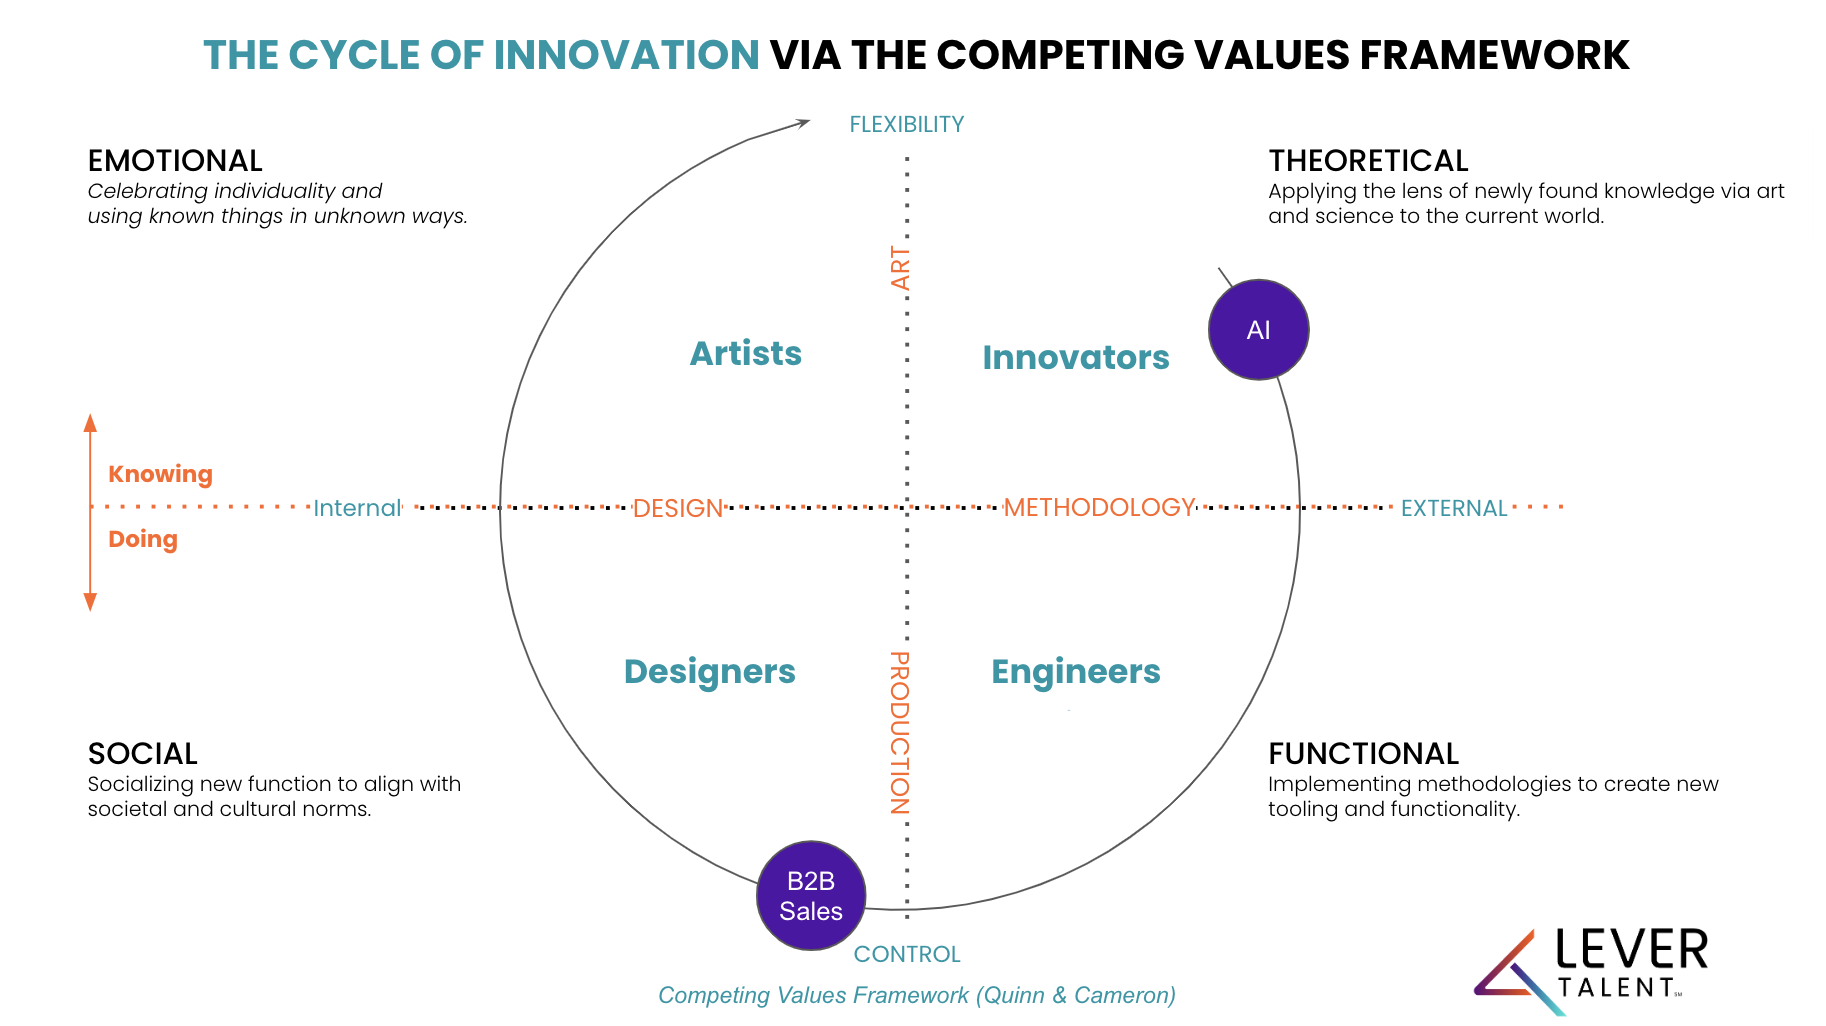 The cycle of innovation via the competing values framework.